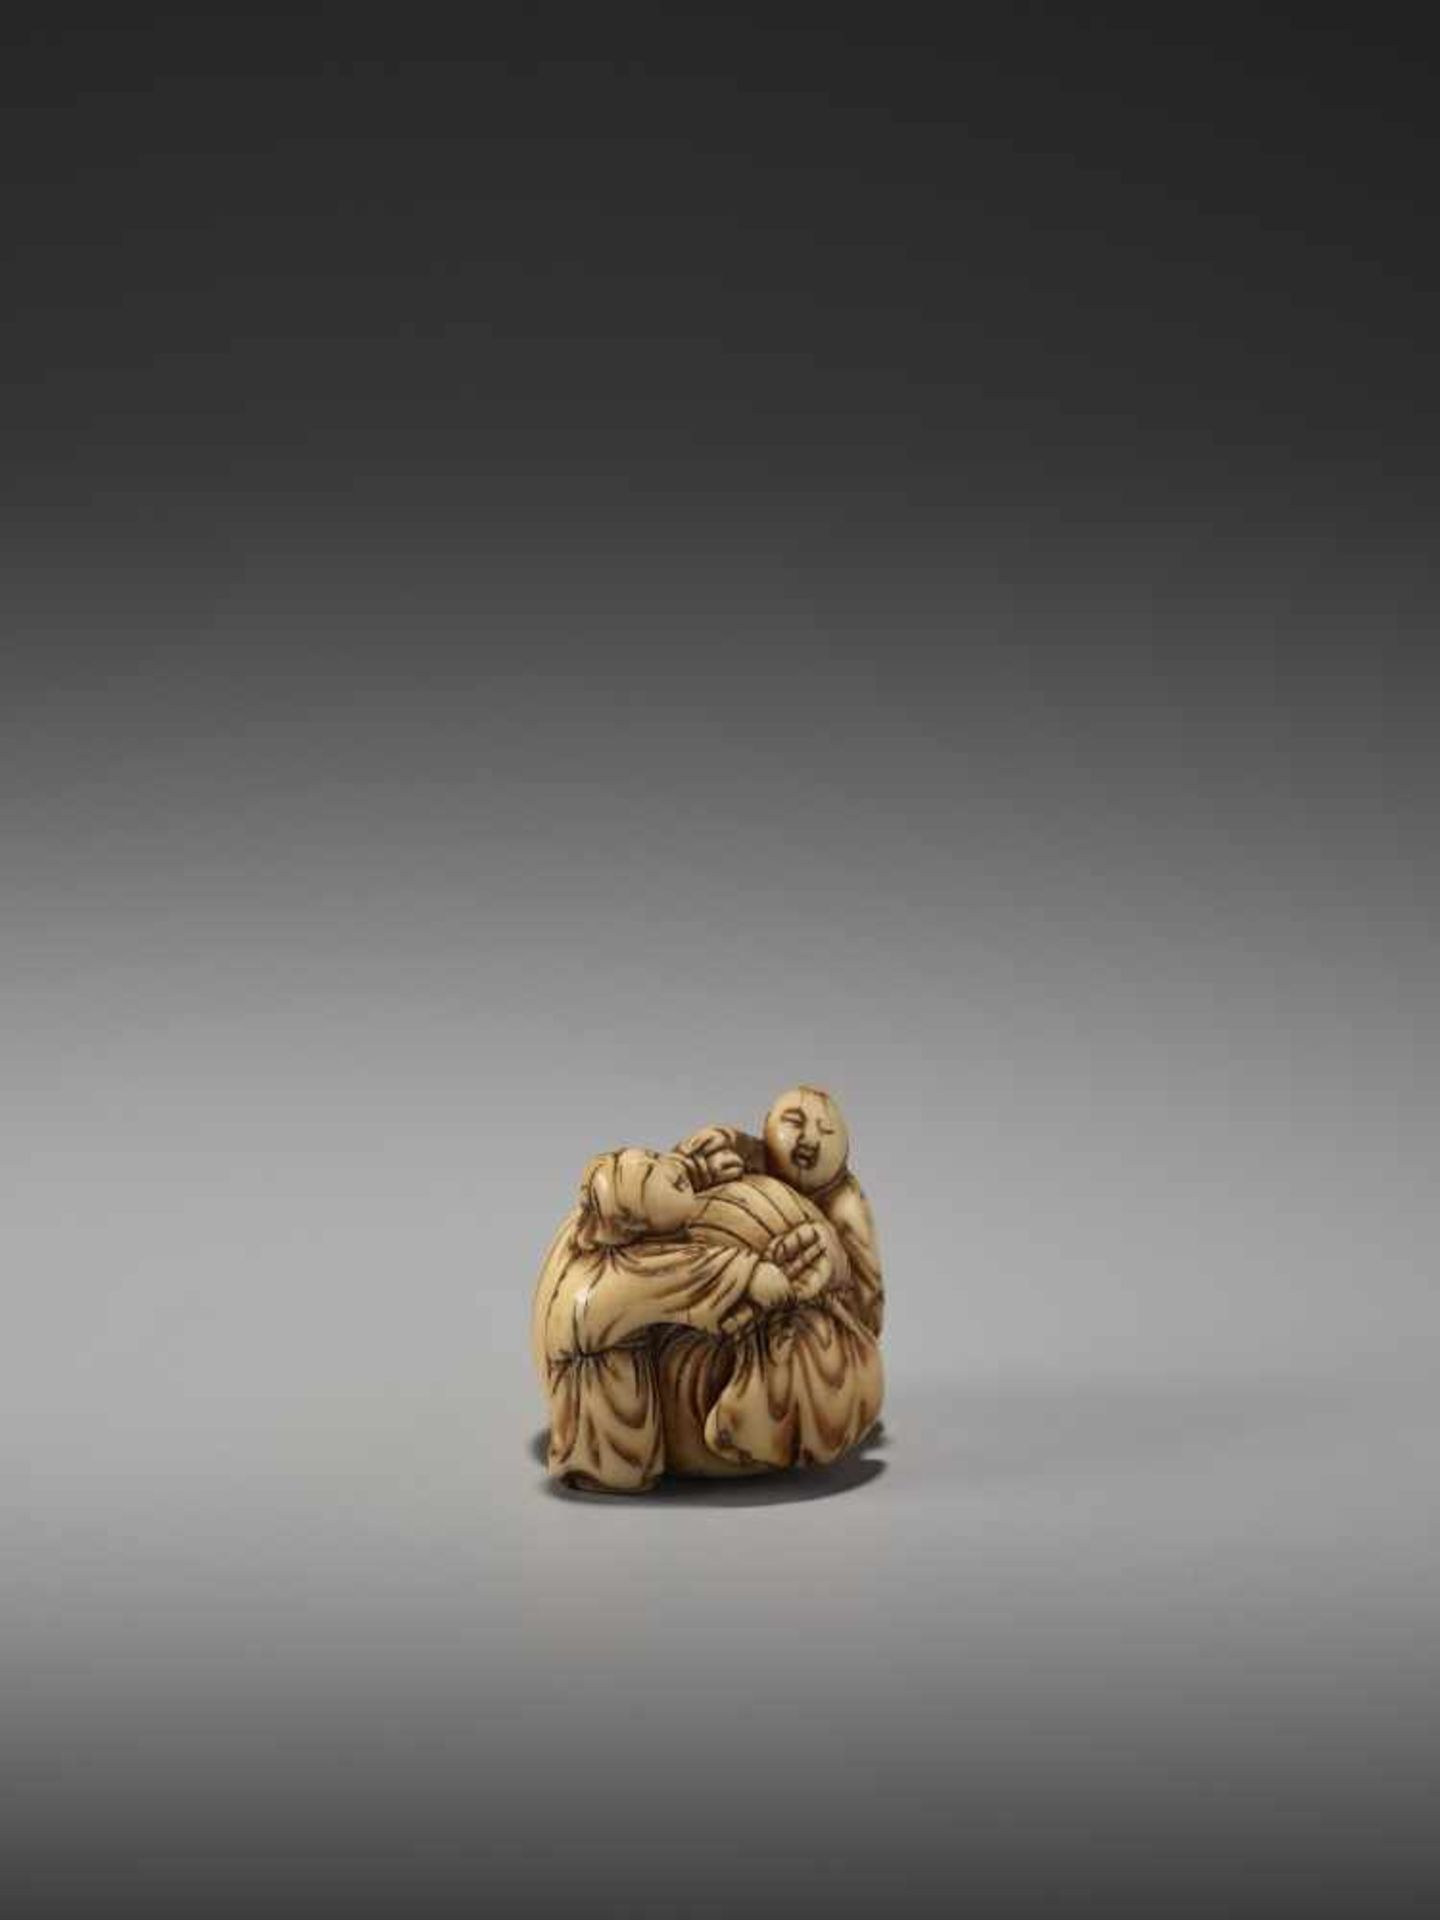 AN EARLY IVORY NETSUKE OF TWO CHINESE BOYS AND THE BAG OF HOTEIUnsigned, ivory netsukeJapan, mid- - Image 4 of 5